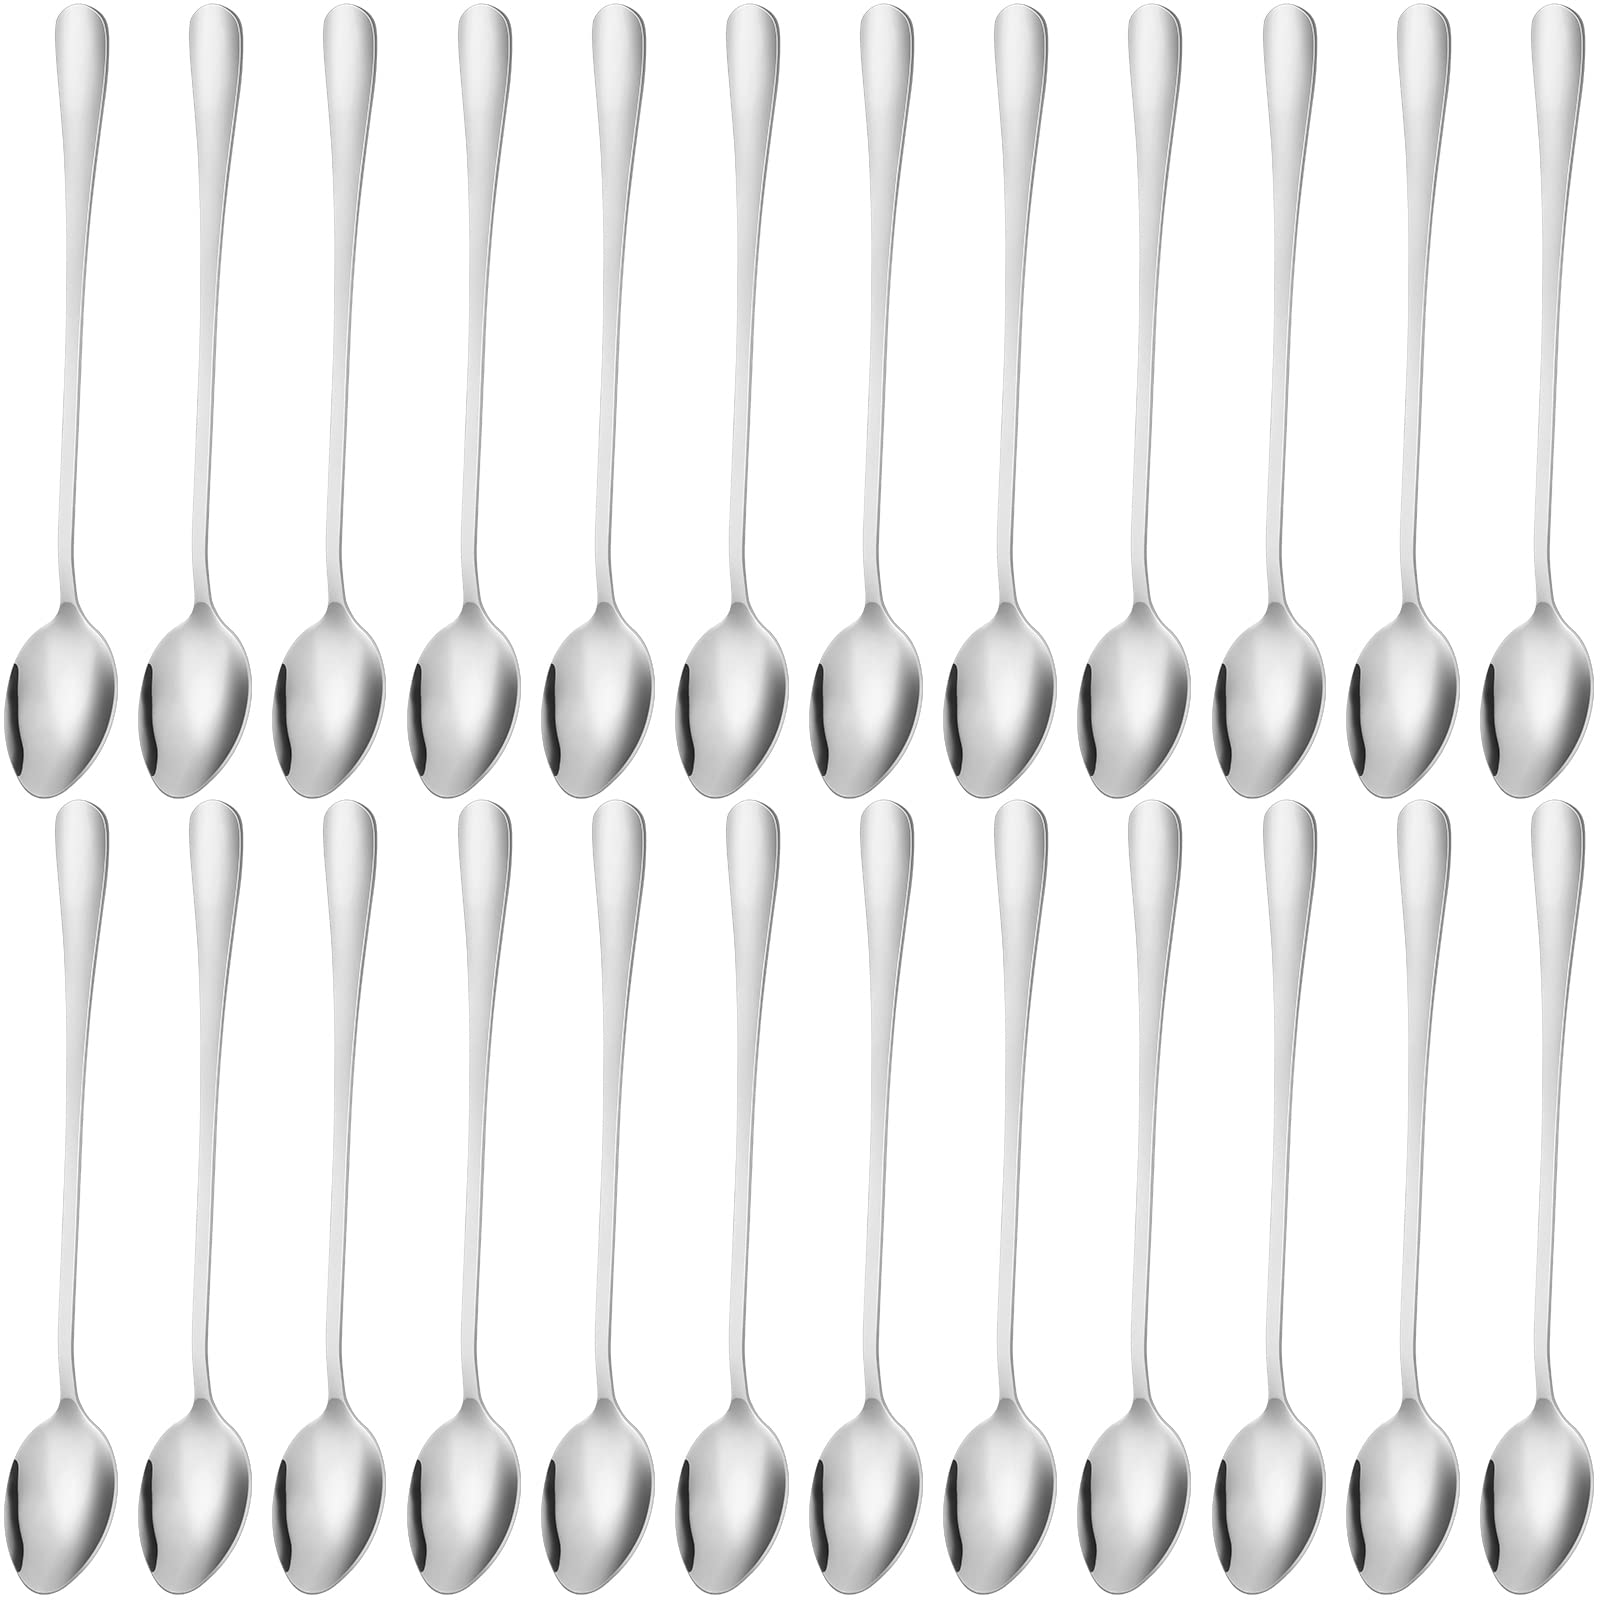 Roshtia Long Handle Spoons, 7.6 Inch Ice Tea Spoon, Long Handle Coffee Spoons, Coffee Stirrers, Ice Cream Spoon, Stainless Steel Coffee Spoons, Cocktail Stirring Spoons (24 Pieces)